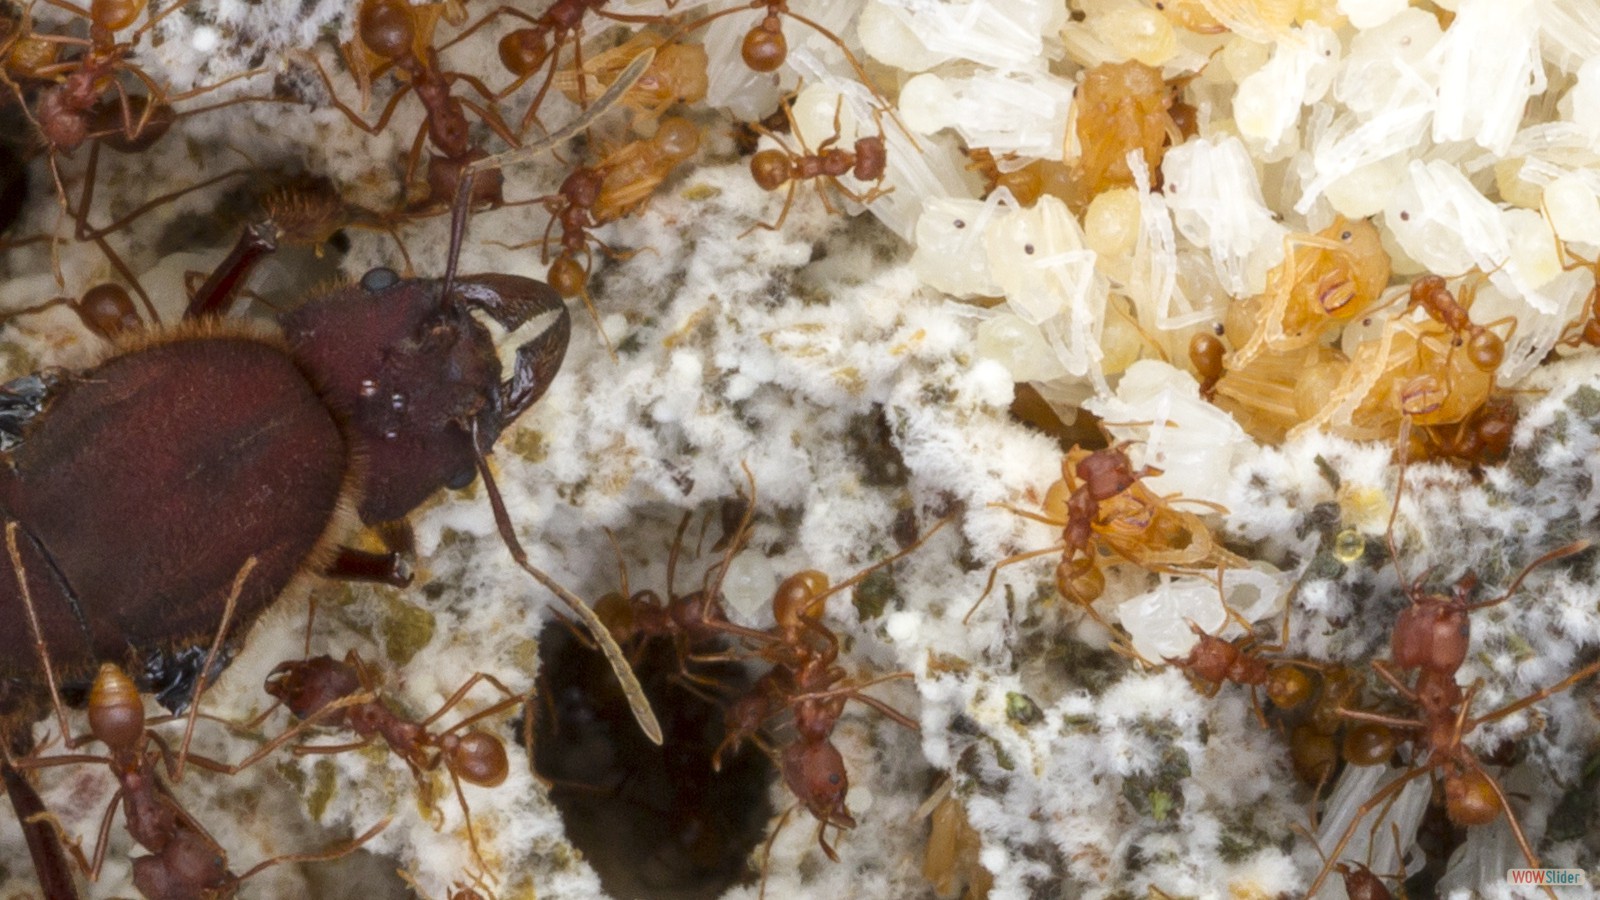 Texas leafcutter ant colony. Photo by Alex Wild